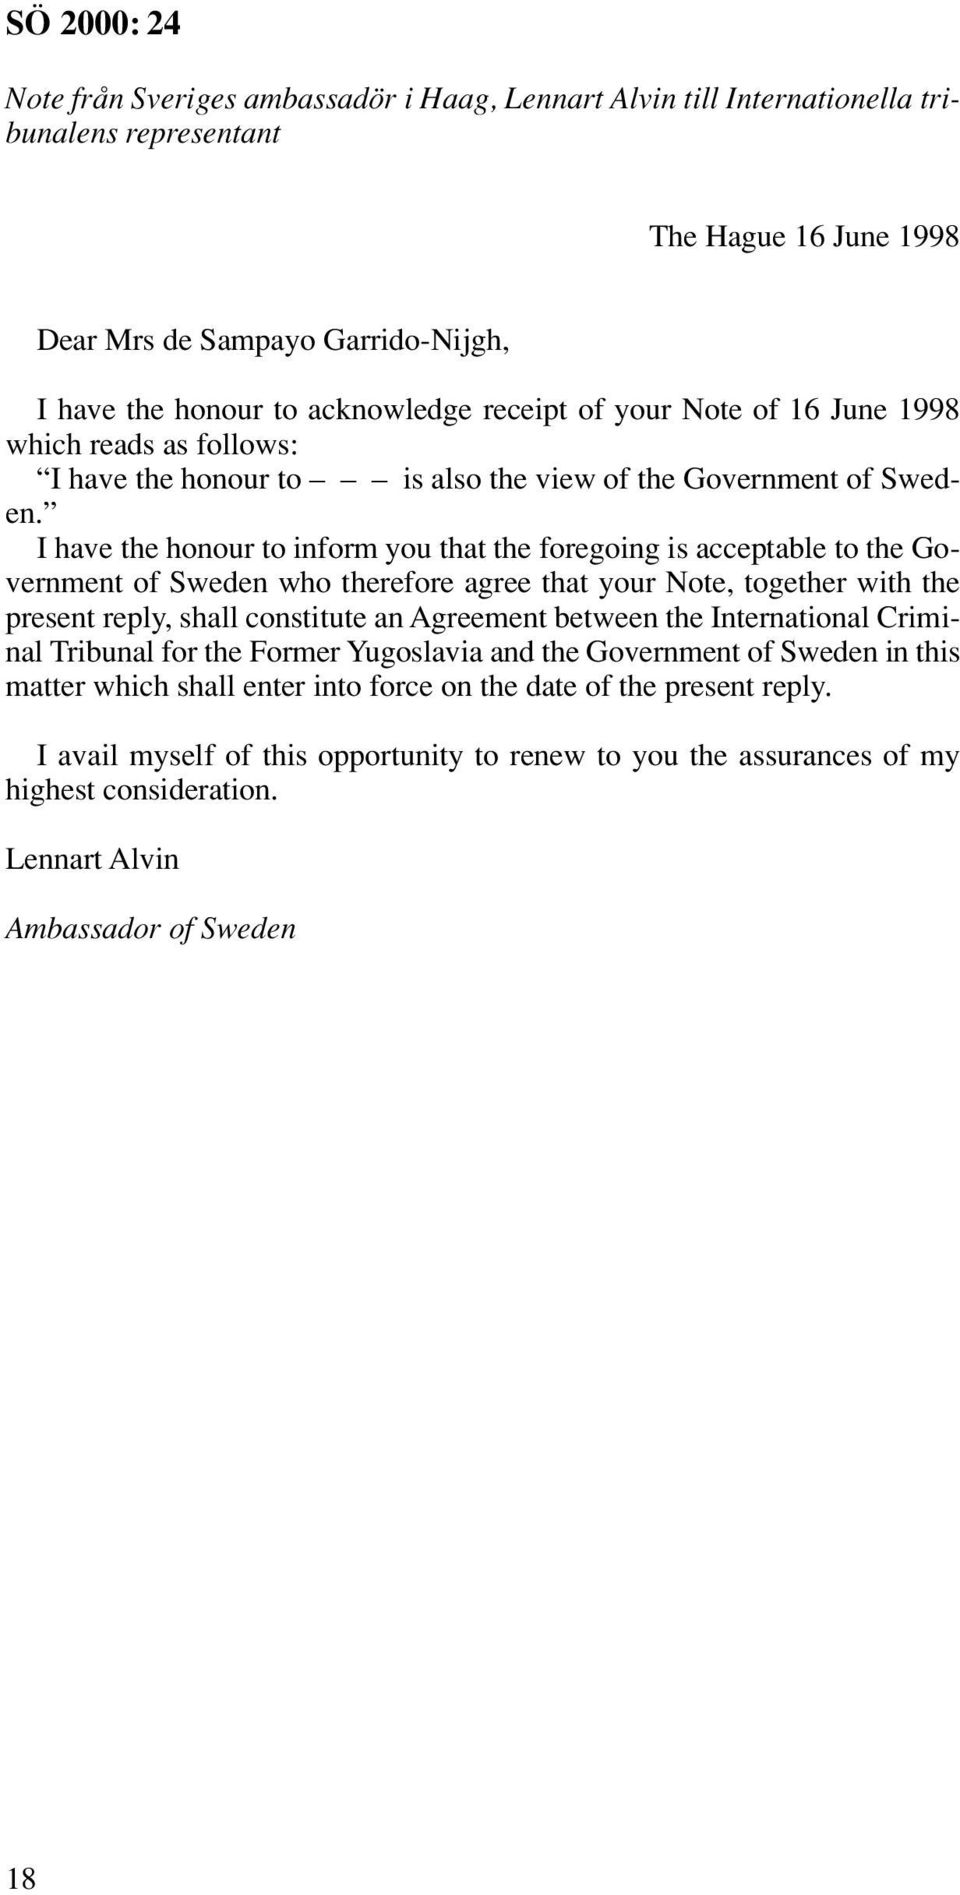 I have the honour to inform you that the foregoing is acceptable to the Government of Sweden who therefore agree that your Note, together with the present reply, shall constitute an Agreement between